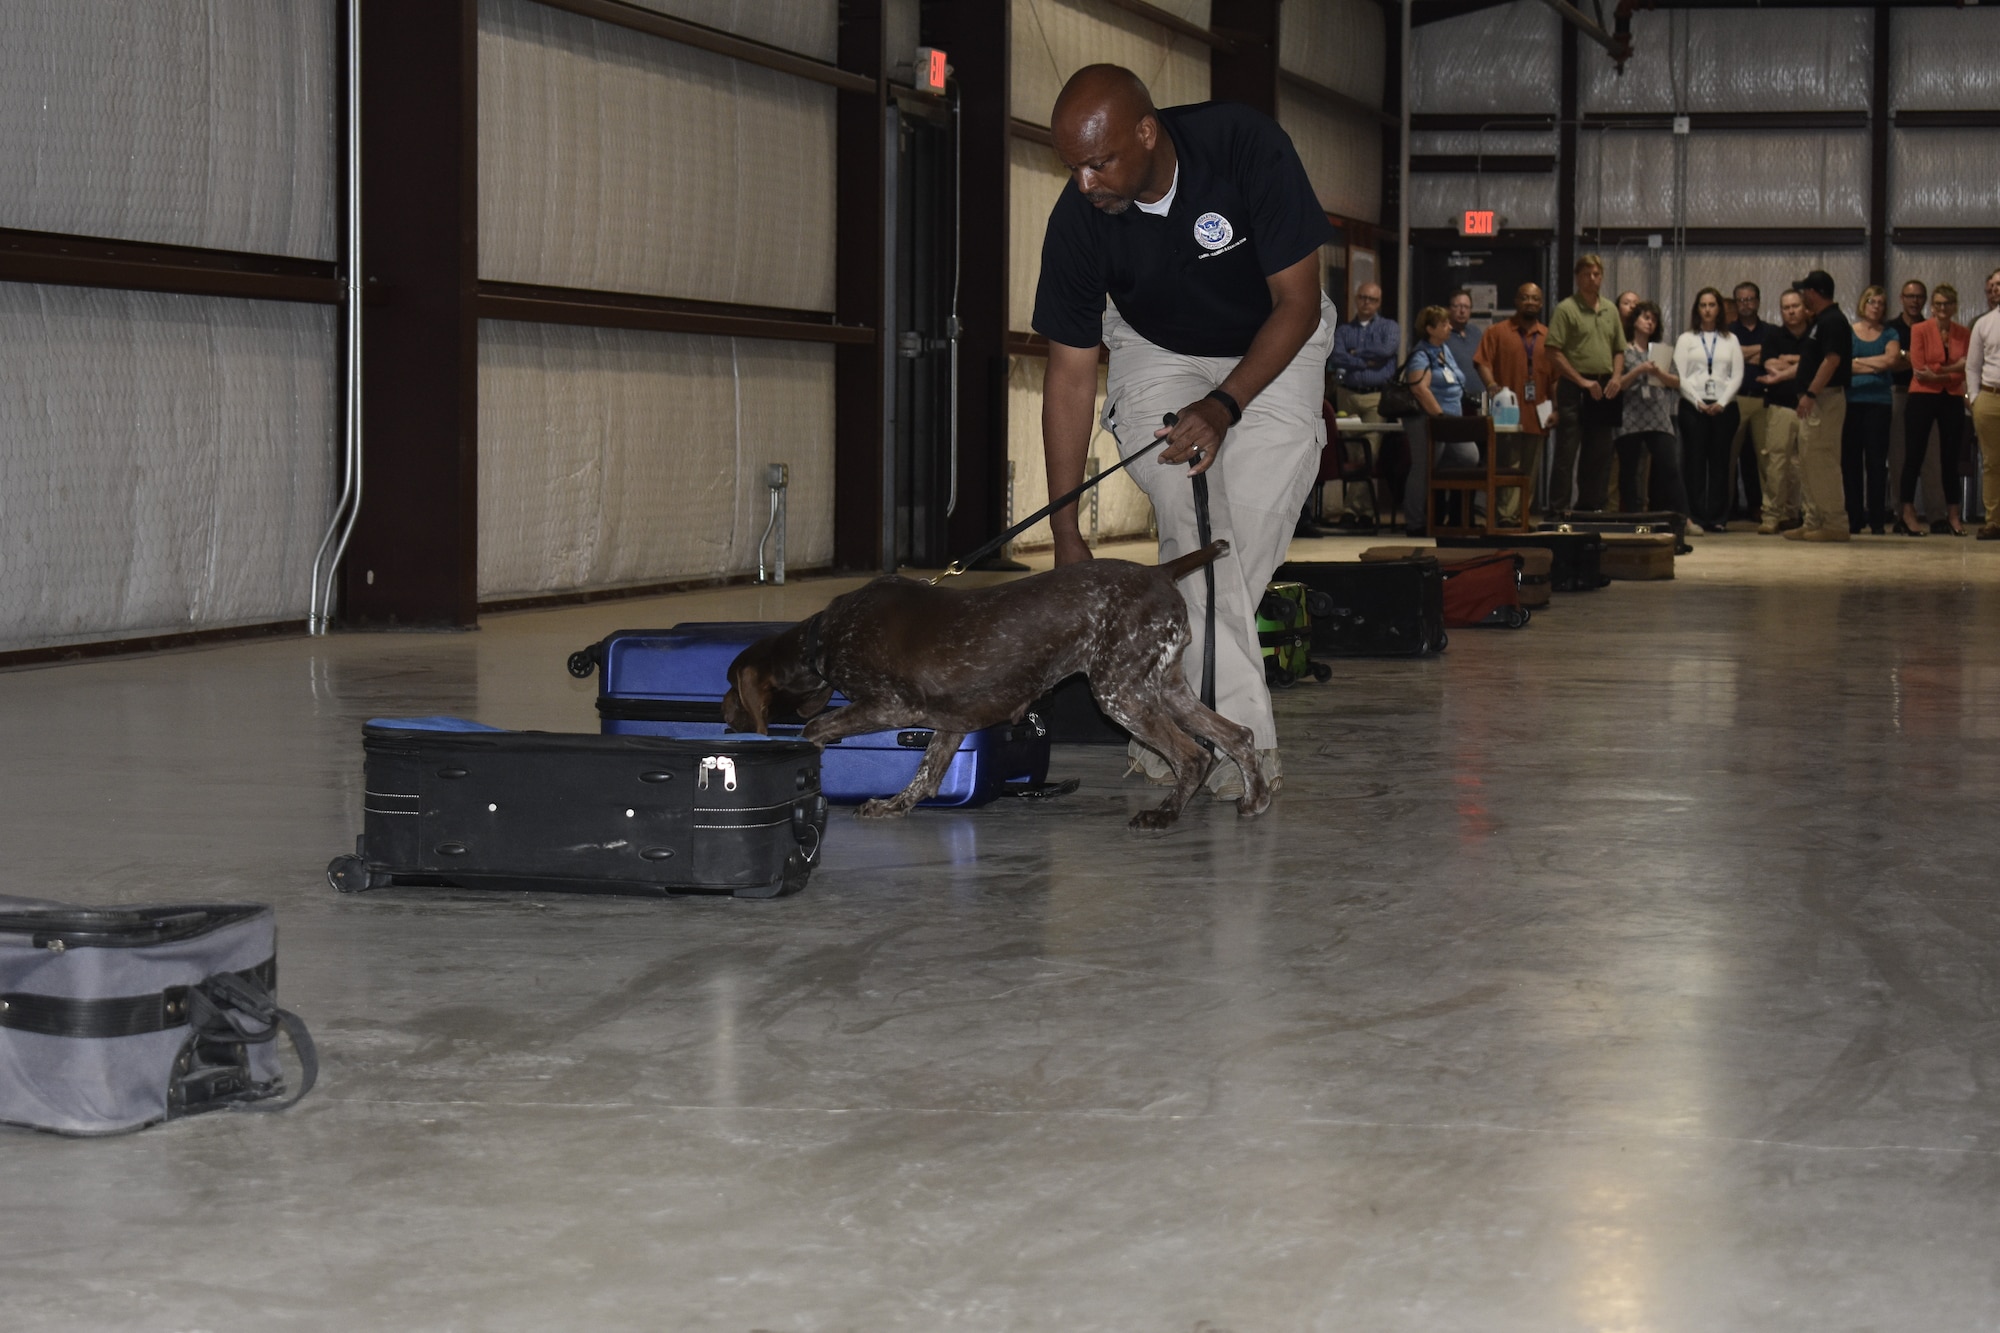 Clark Young, Transportation Security Administration trainer, takes his explosives detection dog Bina through a training exercise at TSA’s canine training center on JBSA-Lackland, Texas, April 17, 2019. Every year, TSA trains about 250 canine teams at JBSA-Lackland to operate in the aviation, multimodal, mass transit, and cargo environments. (U.S. Air Force photo by Shannon Carabajal)